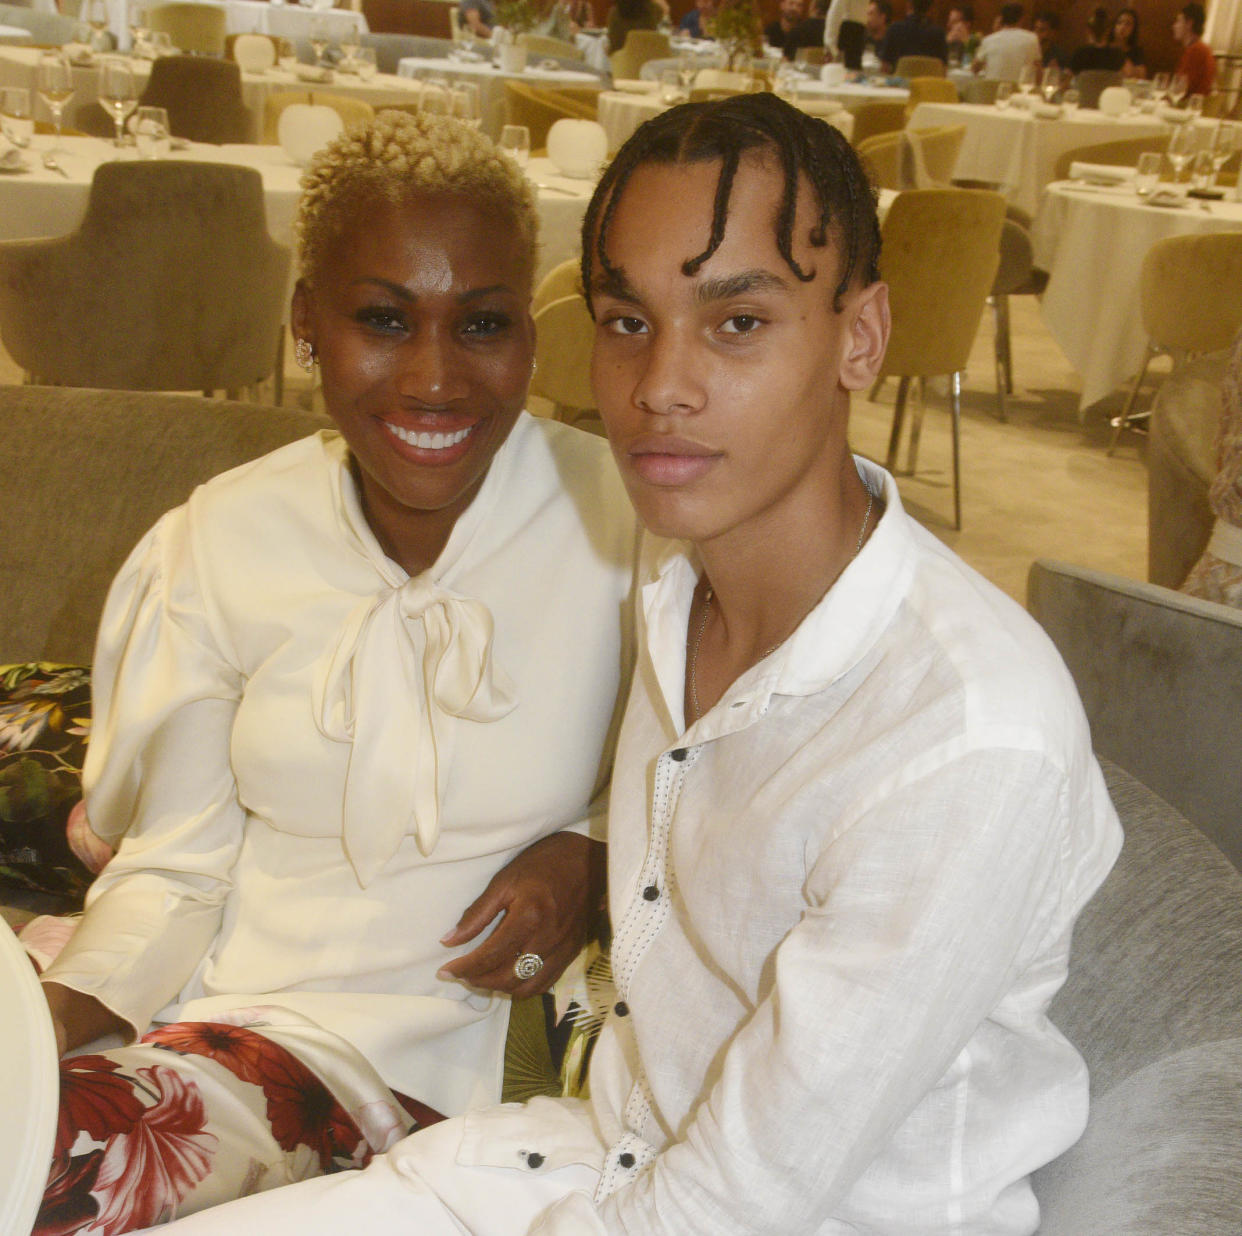 Nicole Coste and her son Alexandre in casual white outfits in a ballroom. (Foc Kan / FilmMagic)